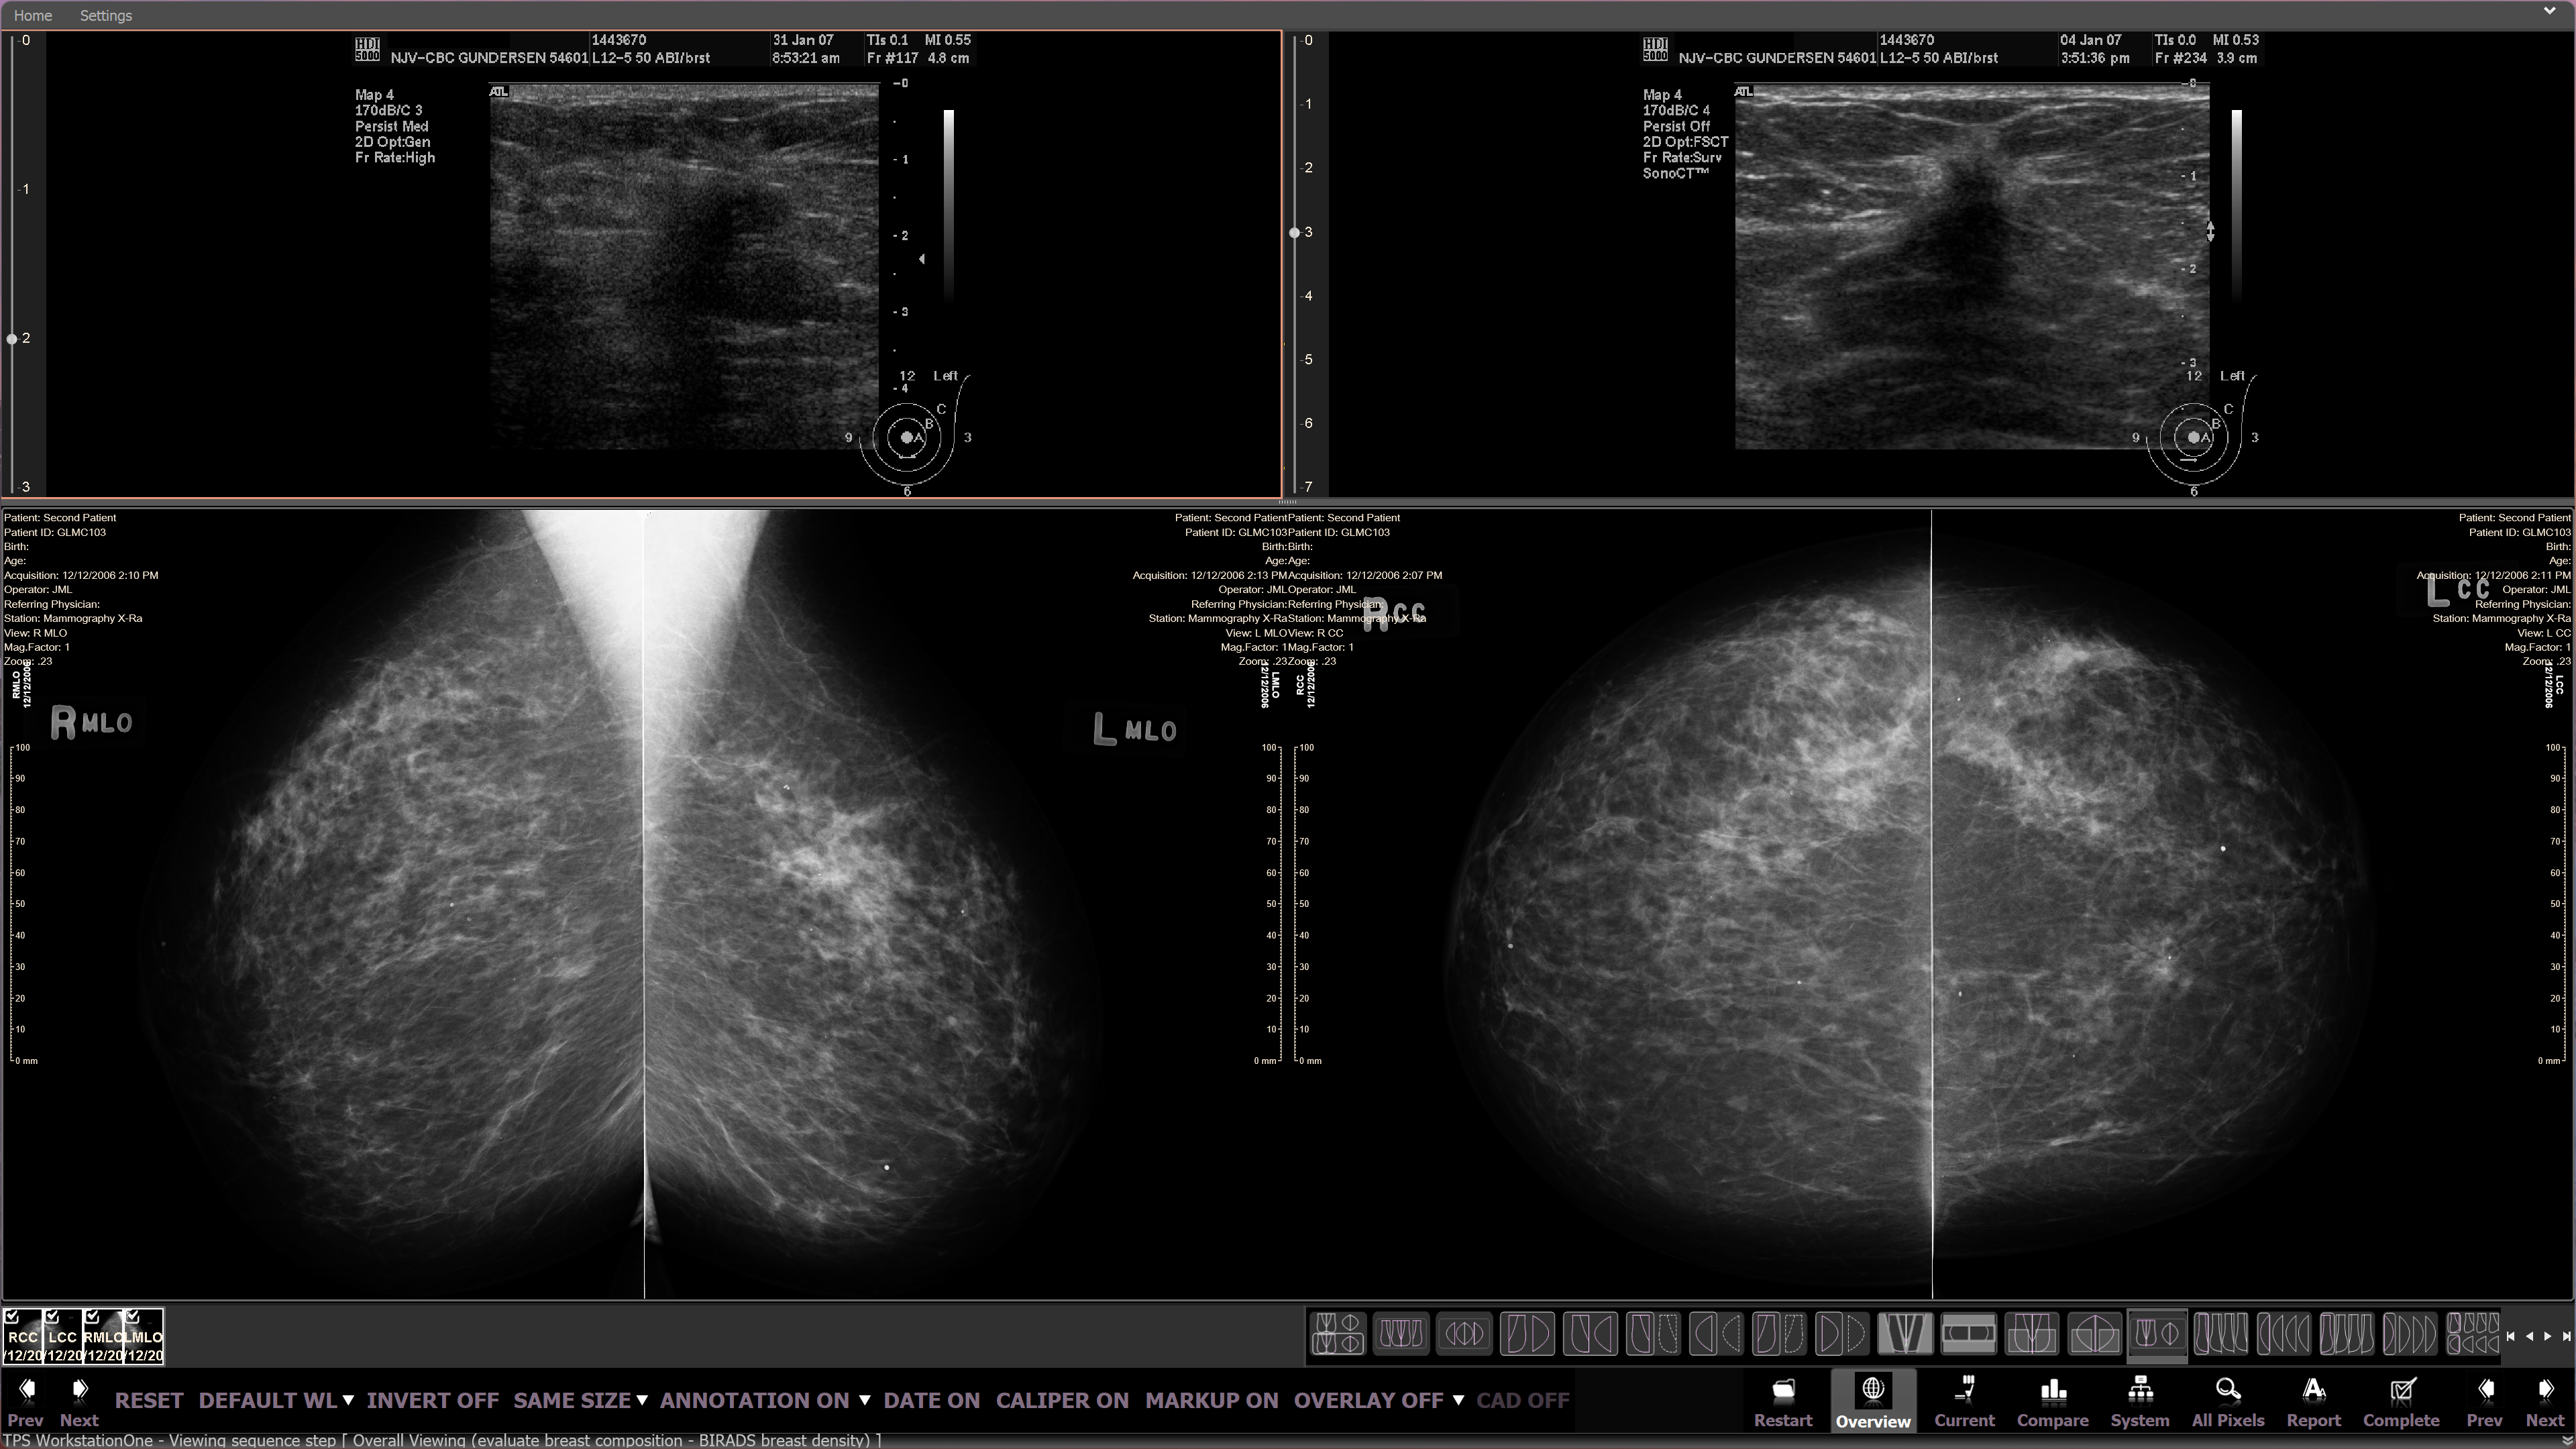 Large high-resolution (12MP) monitor partitioned to show mammography simultaneous with viewers for related modalities.